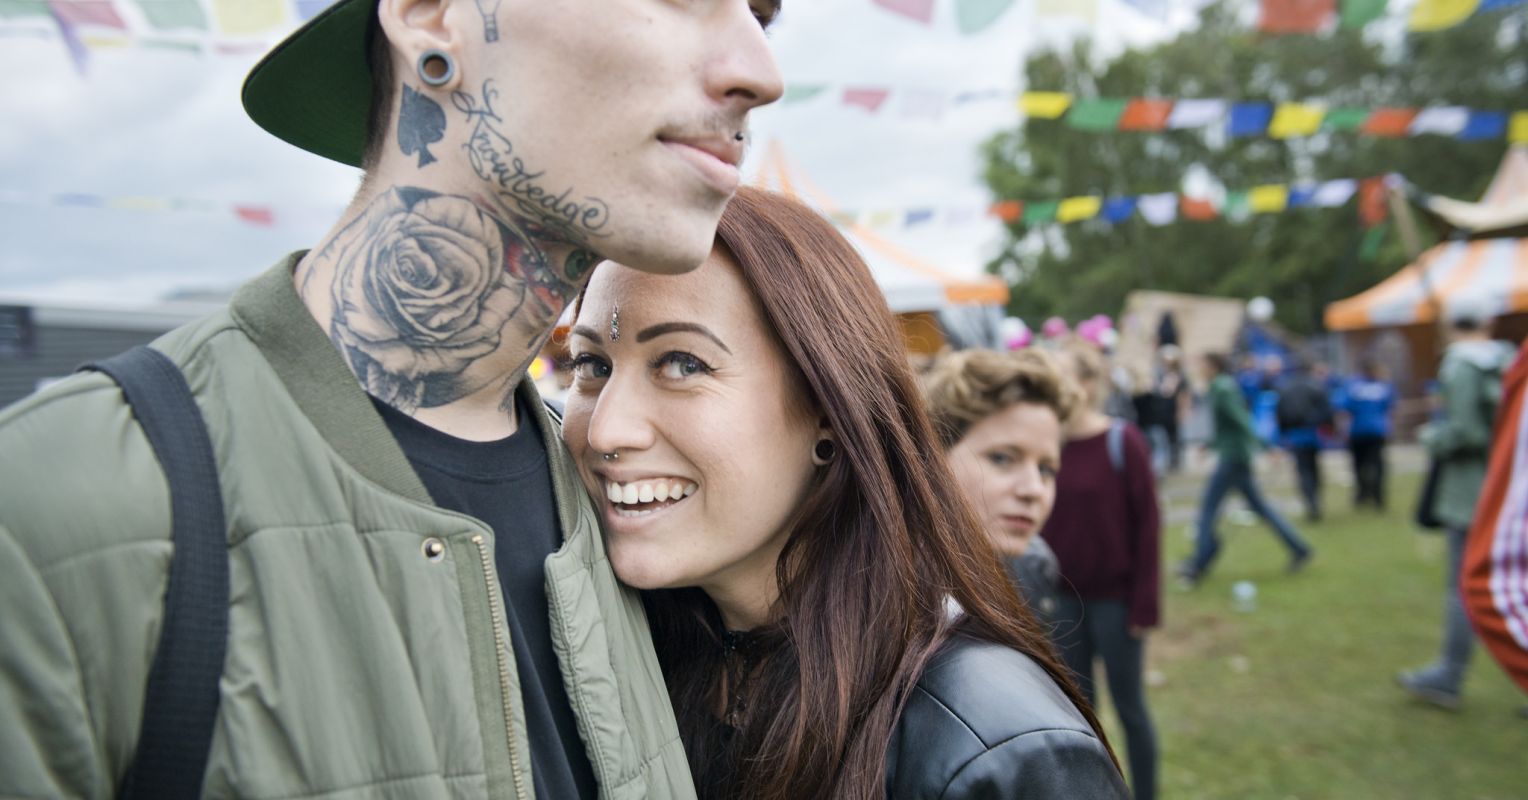 Are Women More Attracted to Men With Tattoos?